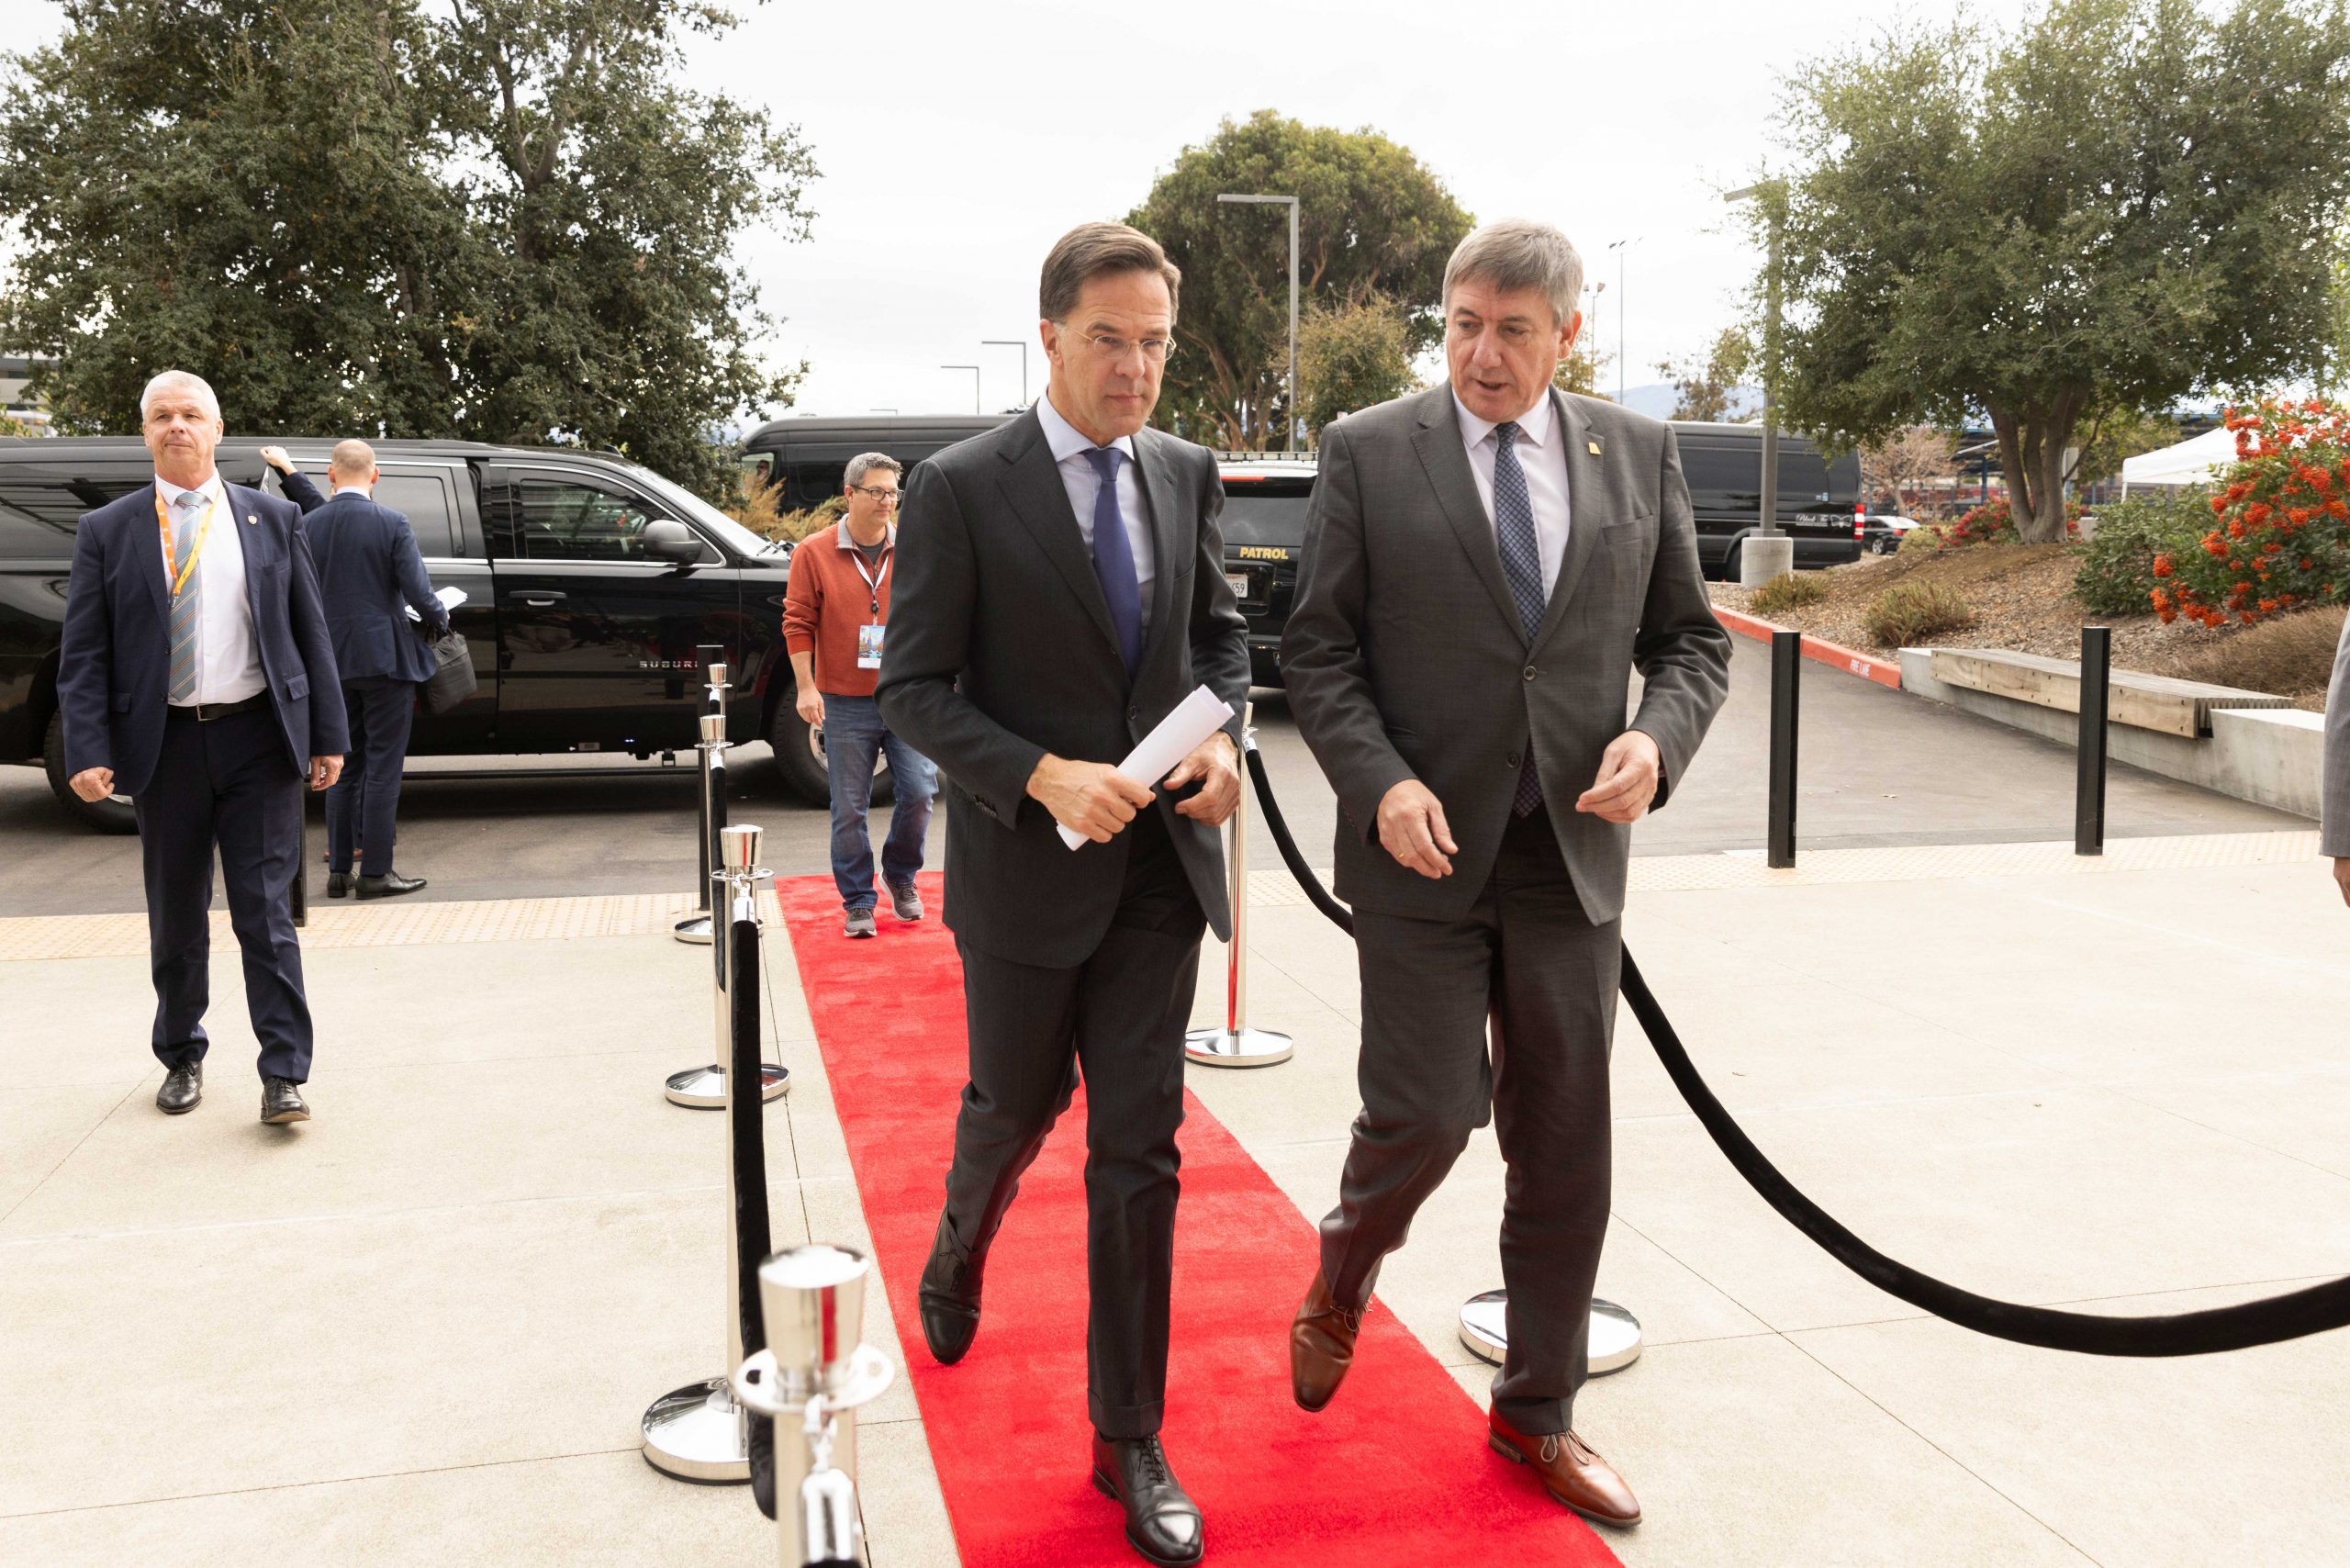 Mark Rutte and Jan Jambon on the red carpet.